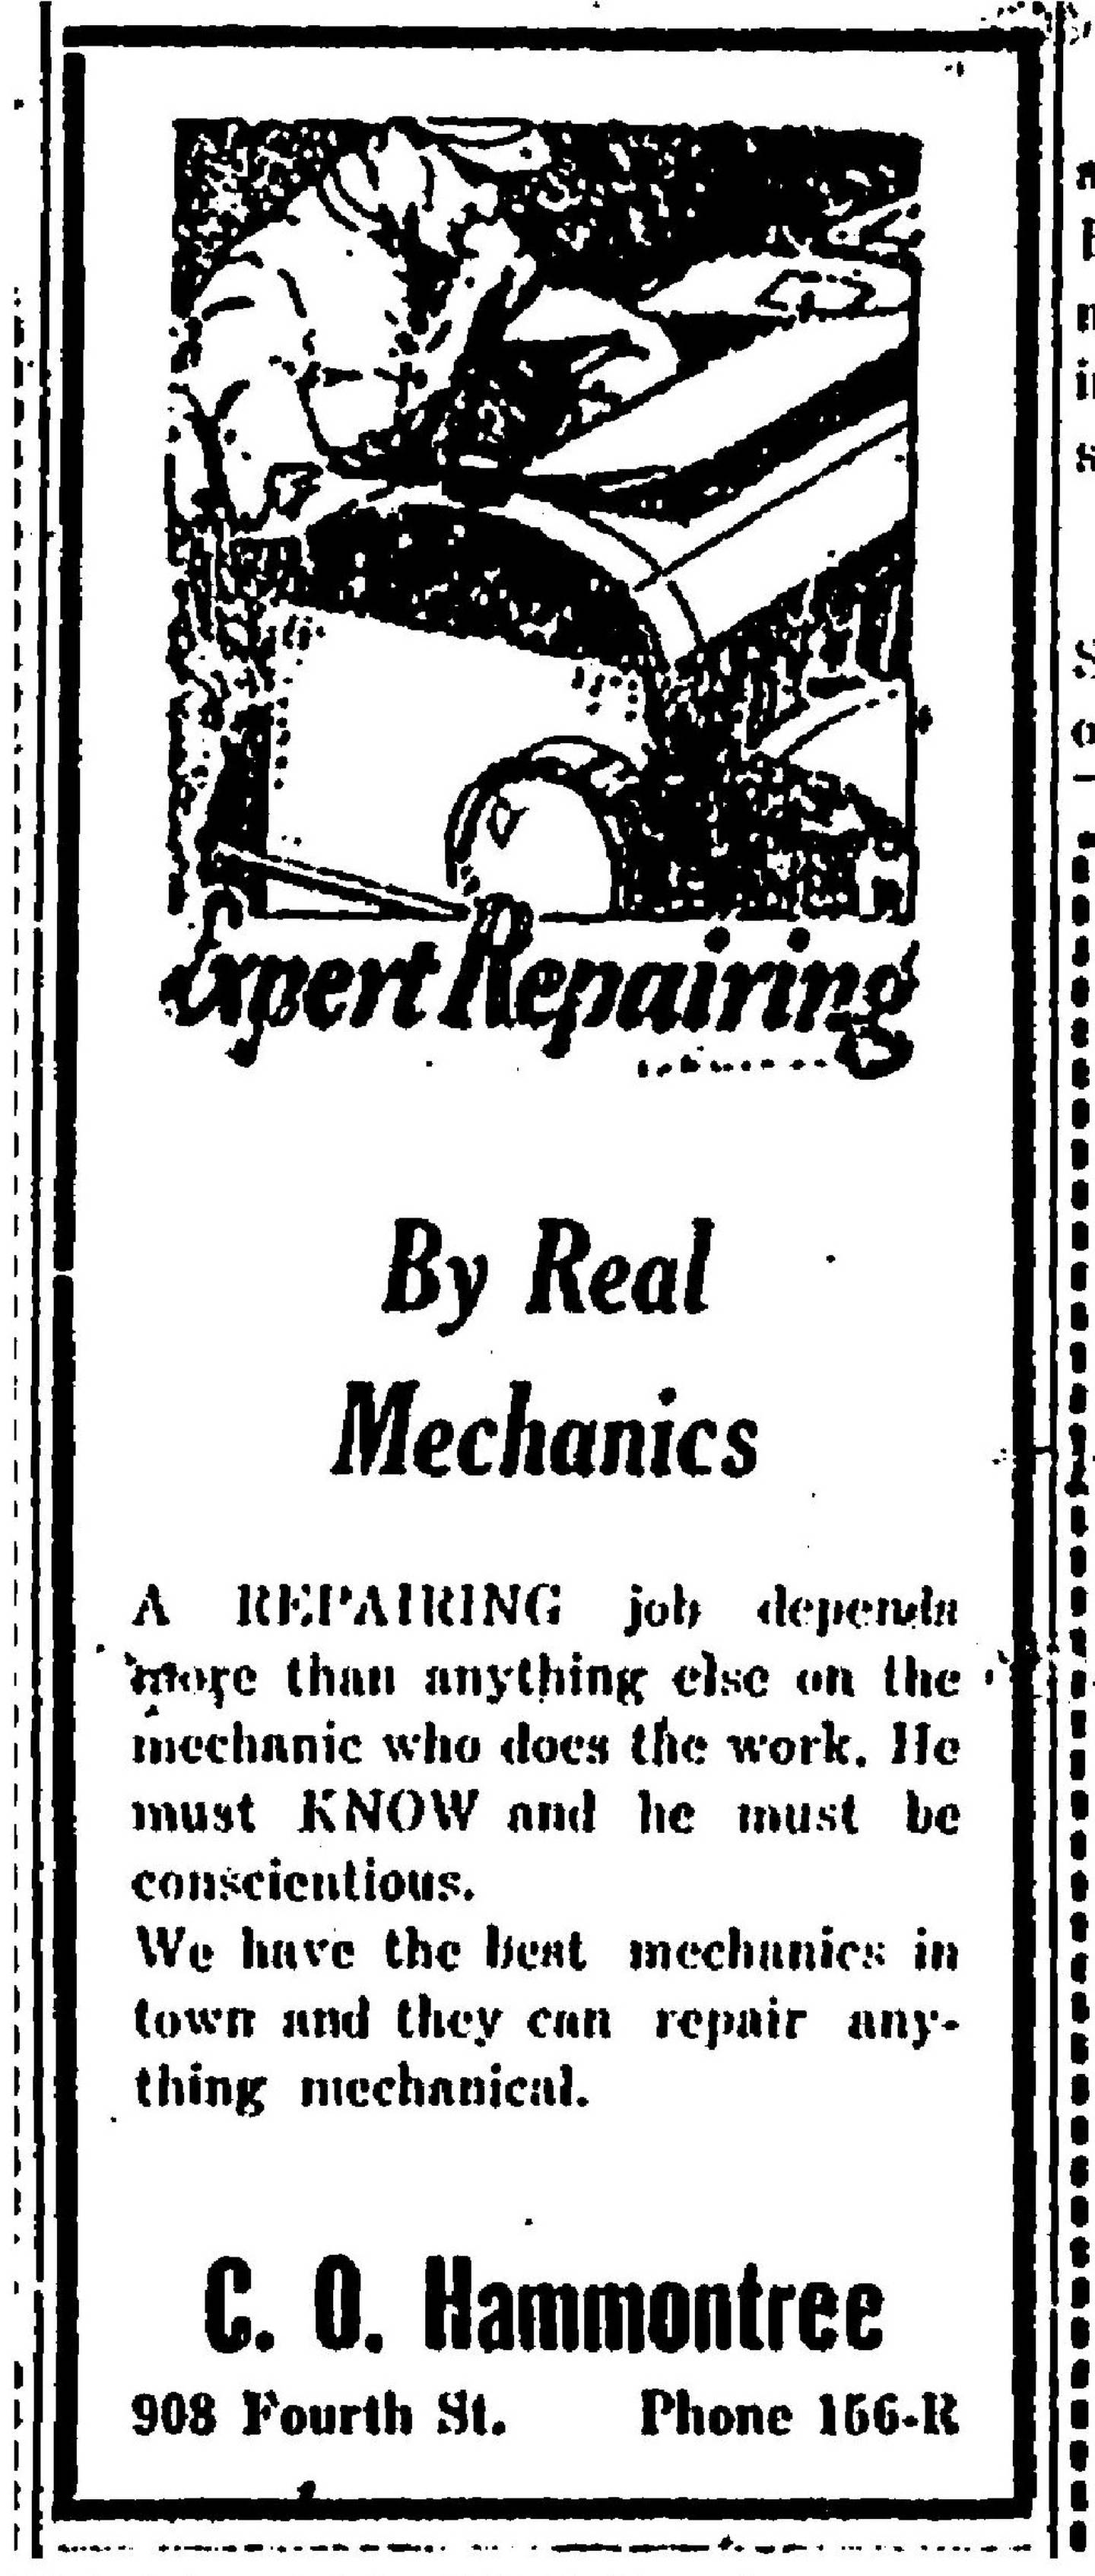 An advertisement for Charles Otis Hammontree's repair business in the May 12, 1923 edition of the Anchorage Daily Times